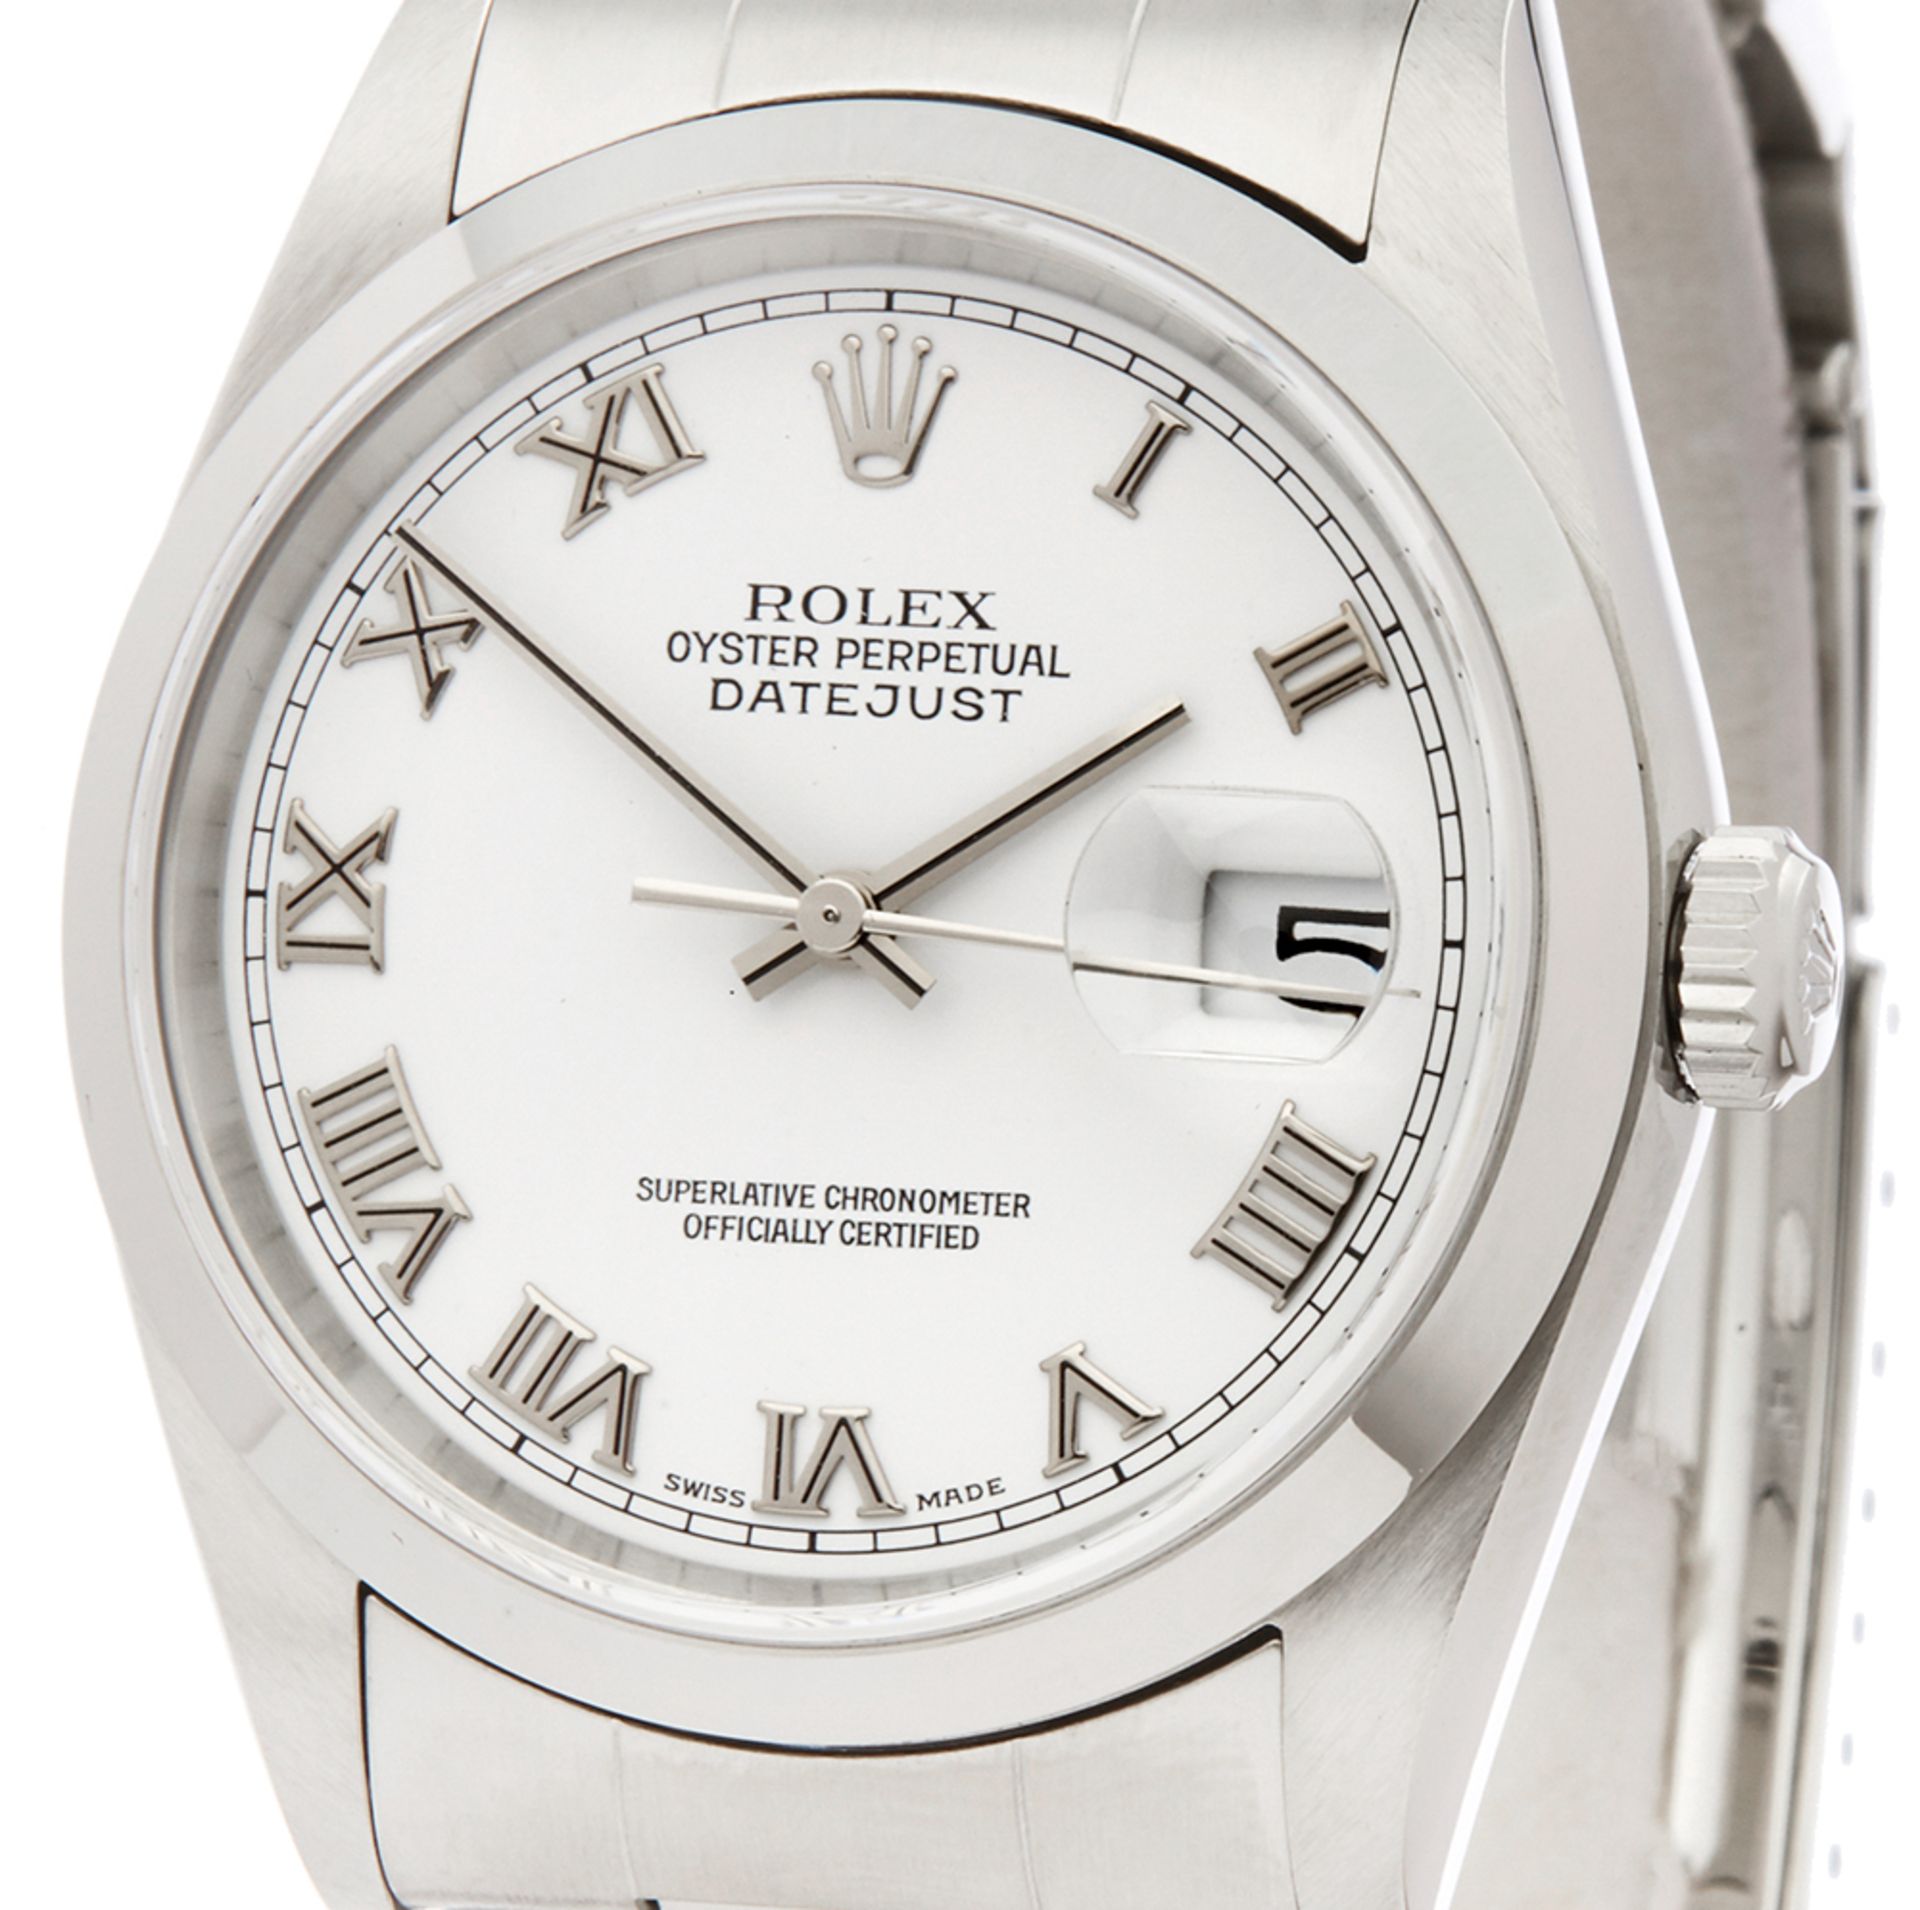 2001 Rolex Datejust 36 Stainless Steel - 16200 - Image 6 of 7